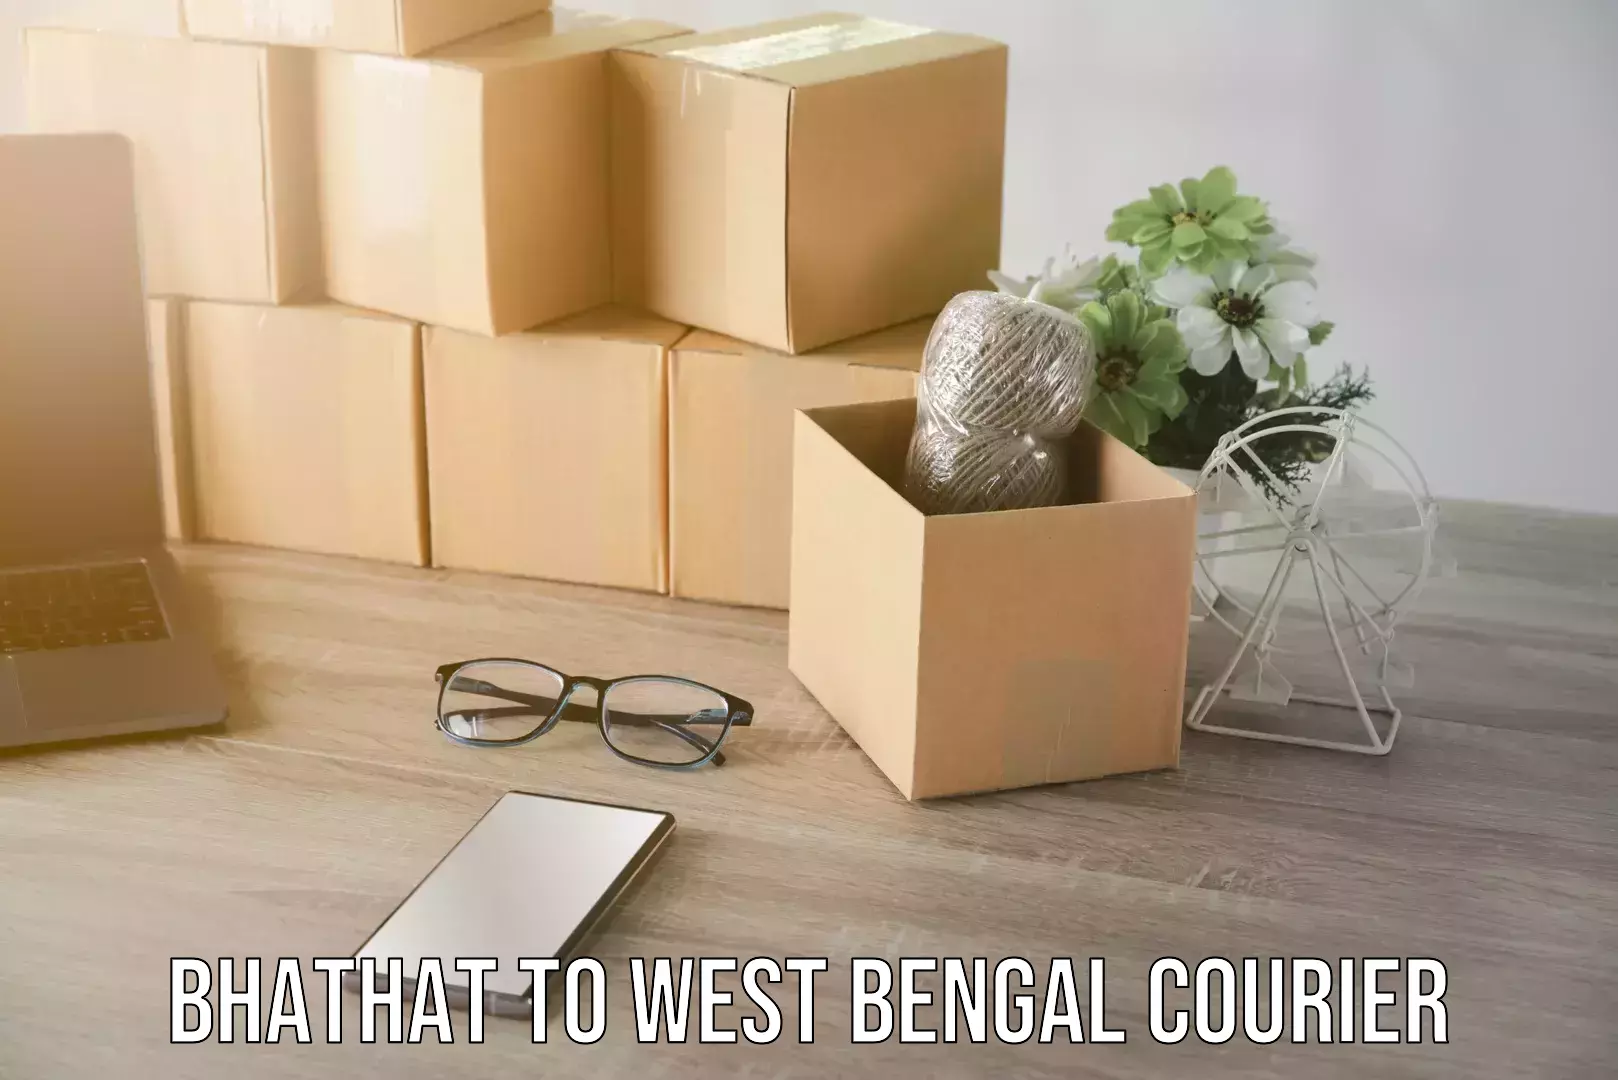 Nationwide parcel services Bhathat to West Bengal